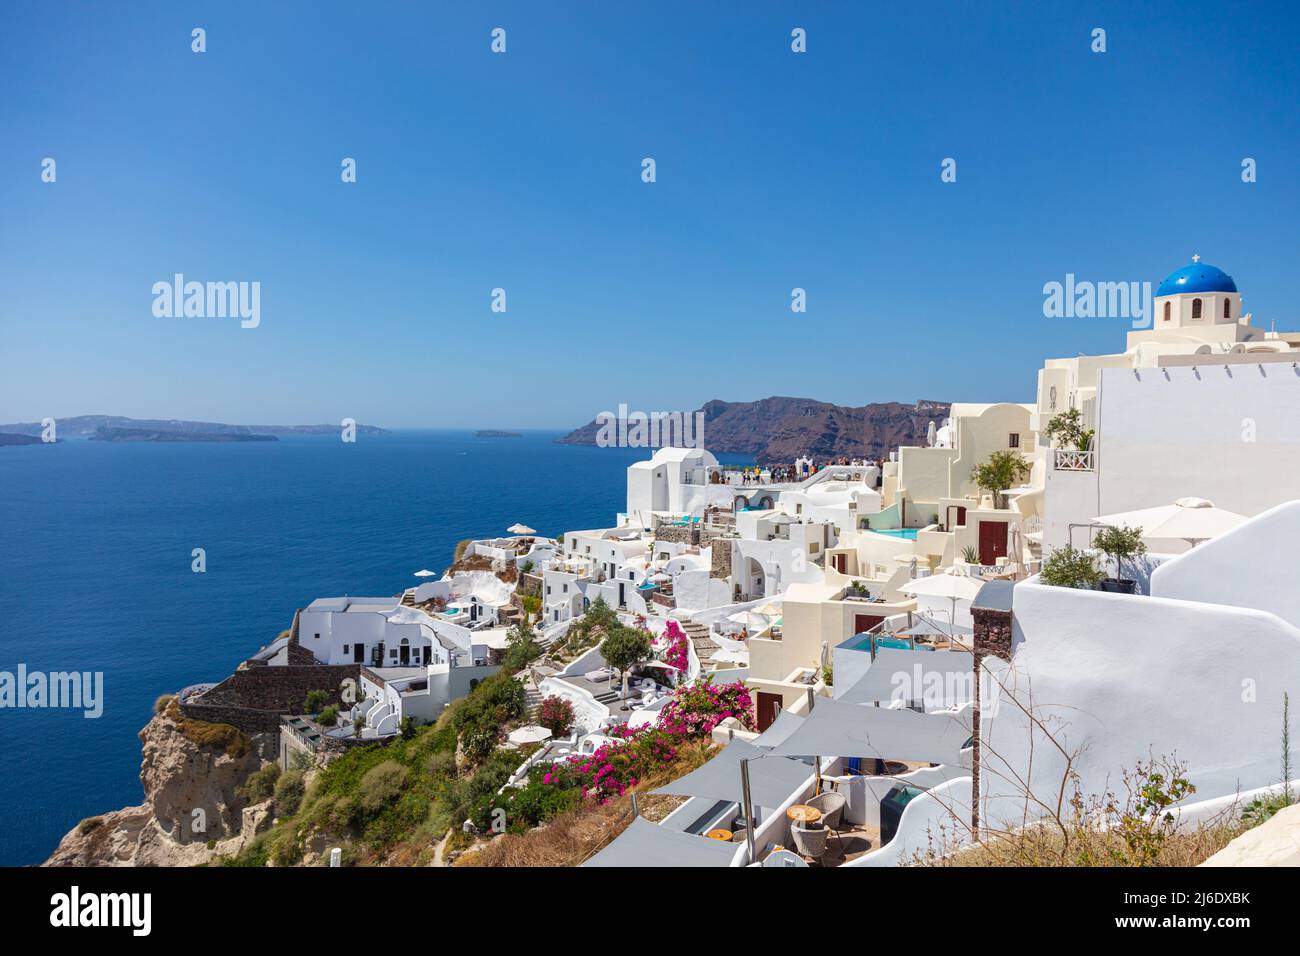 Santorini, Greece - August 7, 2021: View over the roofs of the typical houses of Santorini, island in the cyclades archipelago in the Aegean Sea. Whit Stock Photo